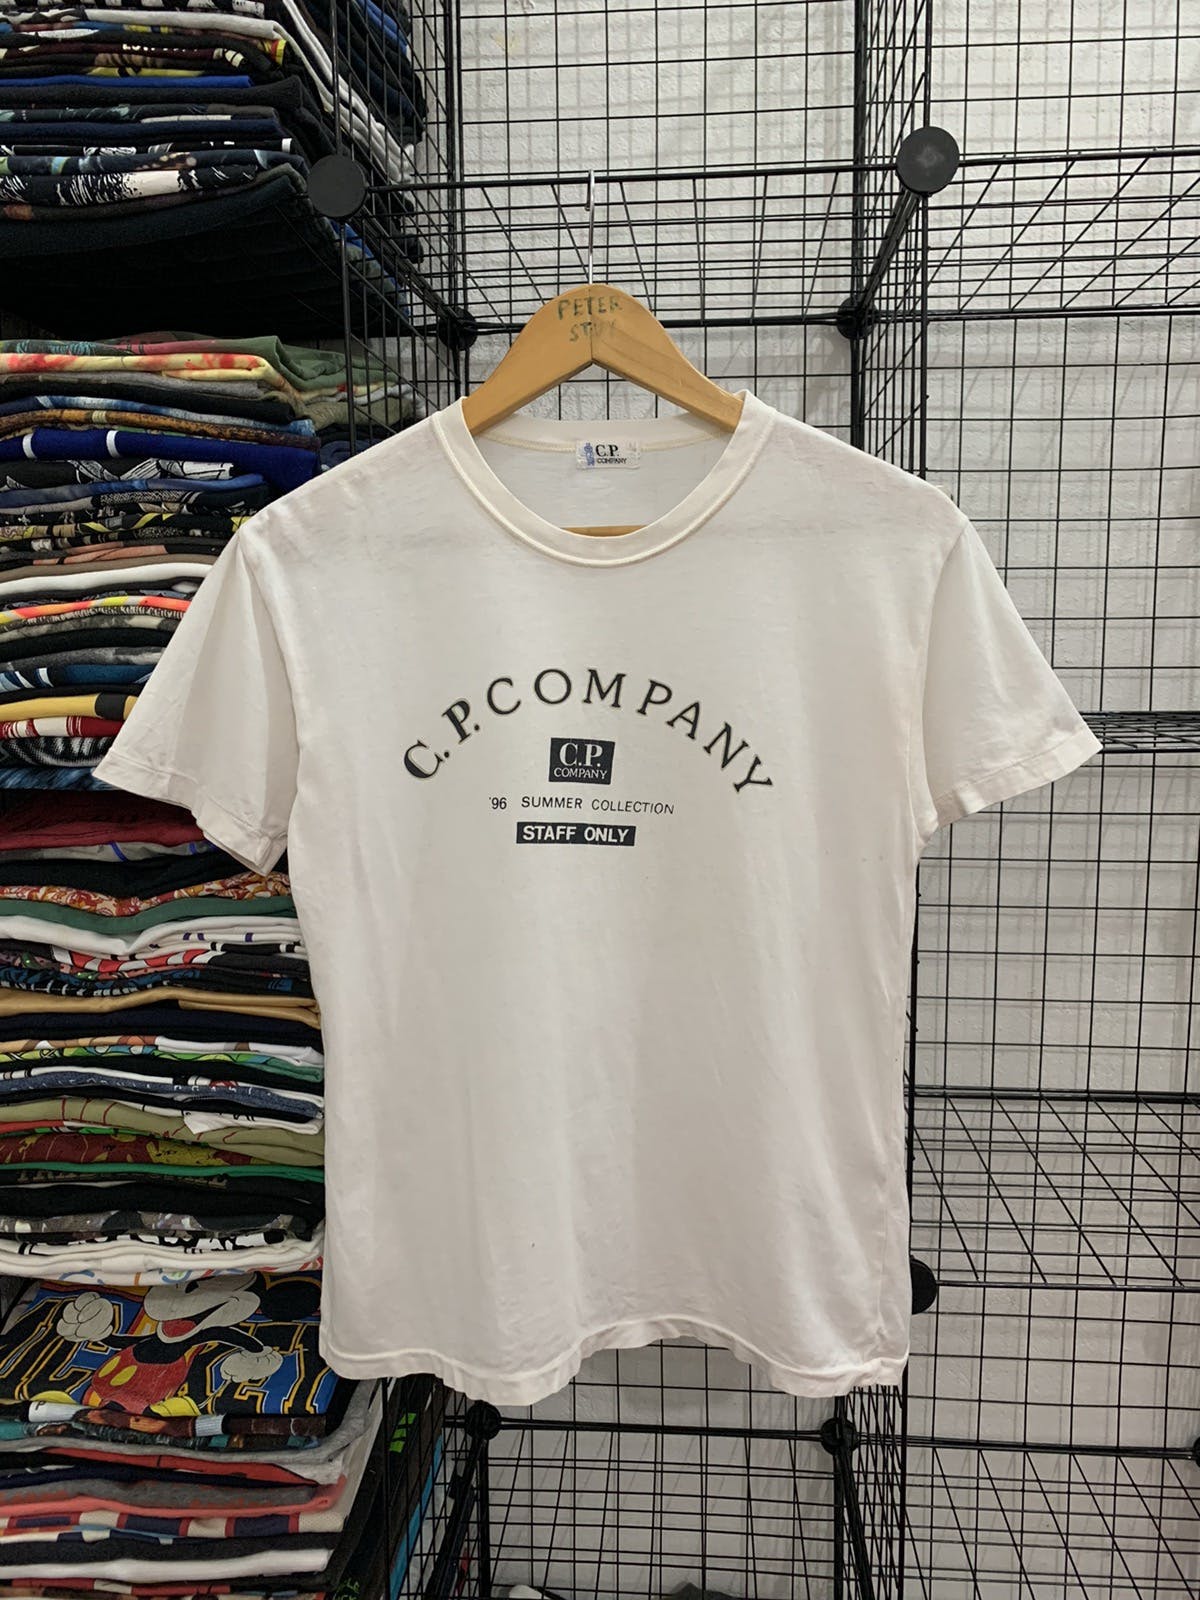 CP COMPANY 1996 SUMMER COLLECTION STAFF ONLY T-SHIRT - 1